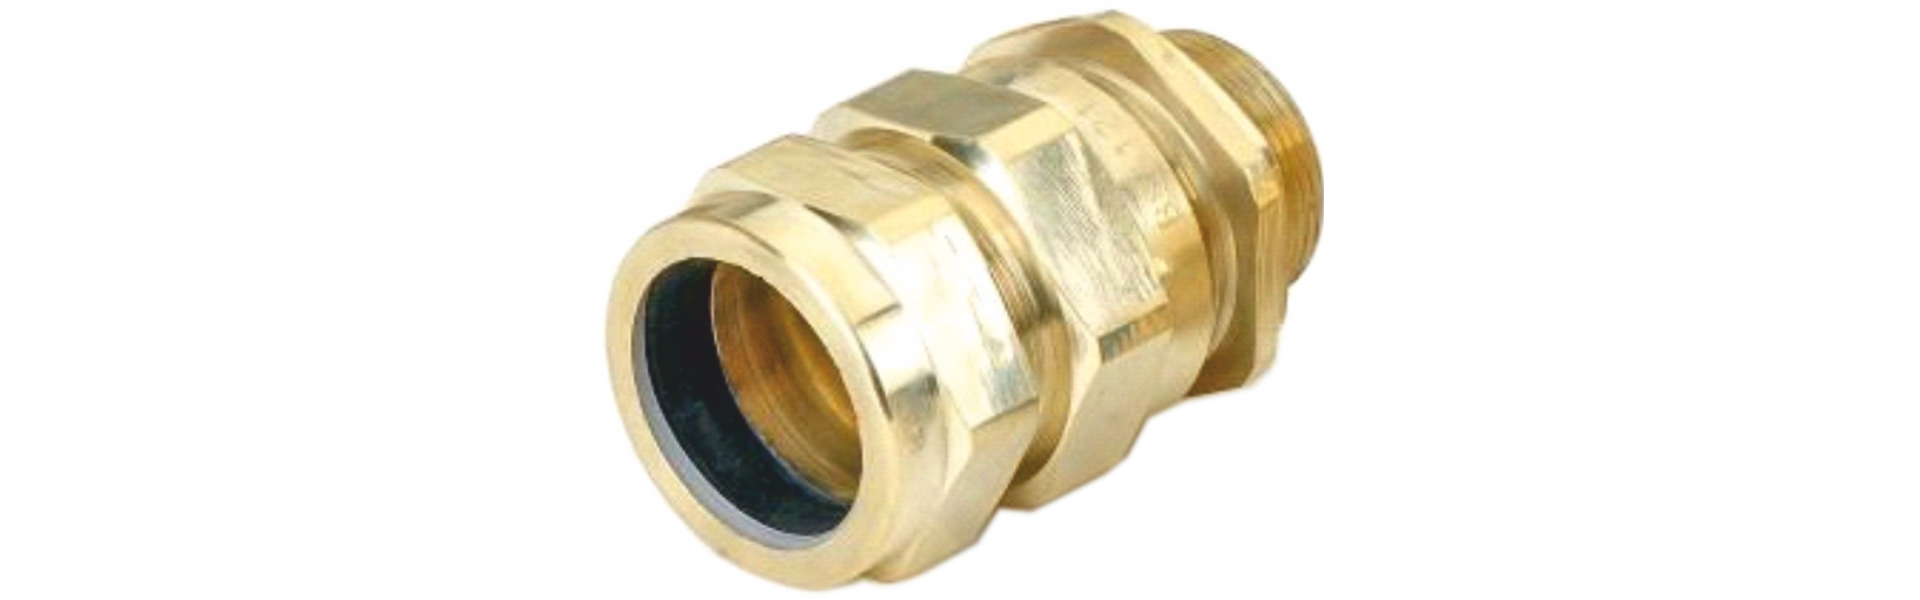 NDUSTRIAL CABLE GLANDS (INTERNATIONAL)